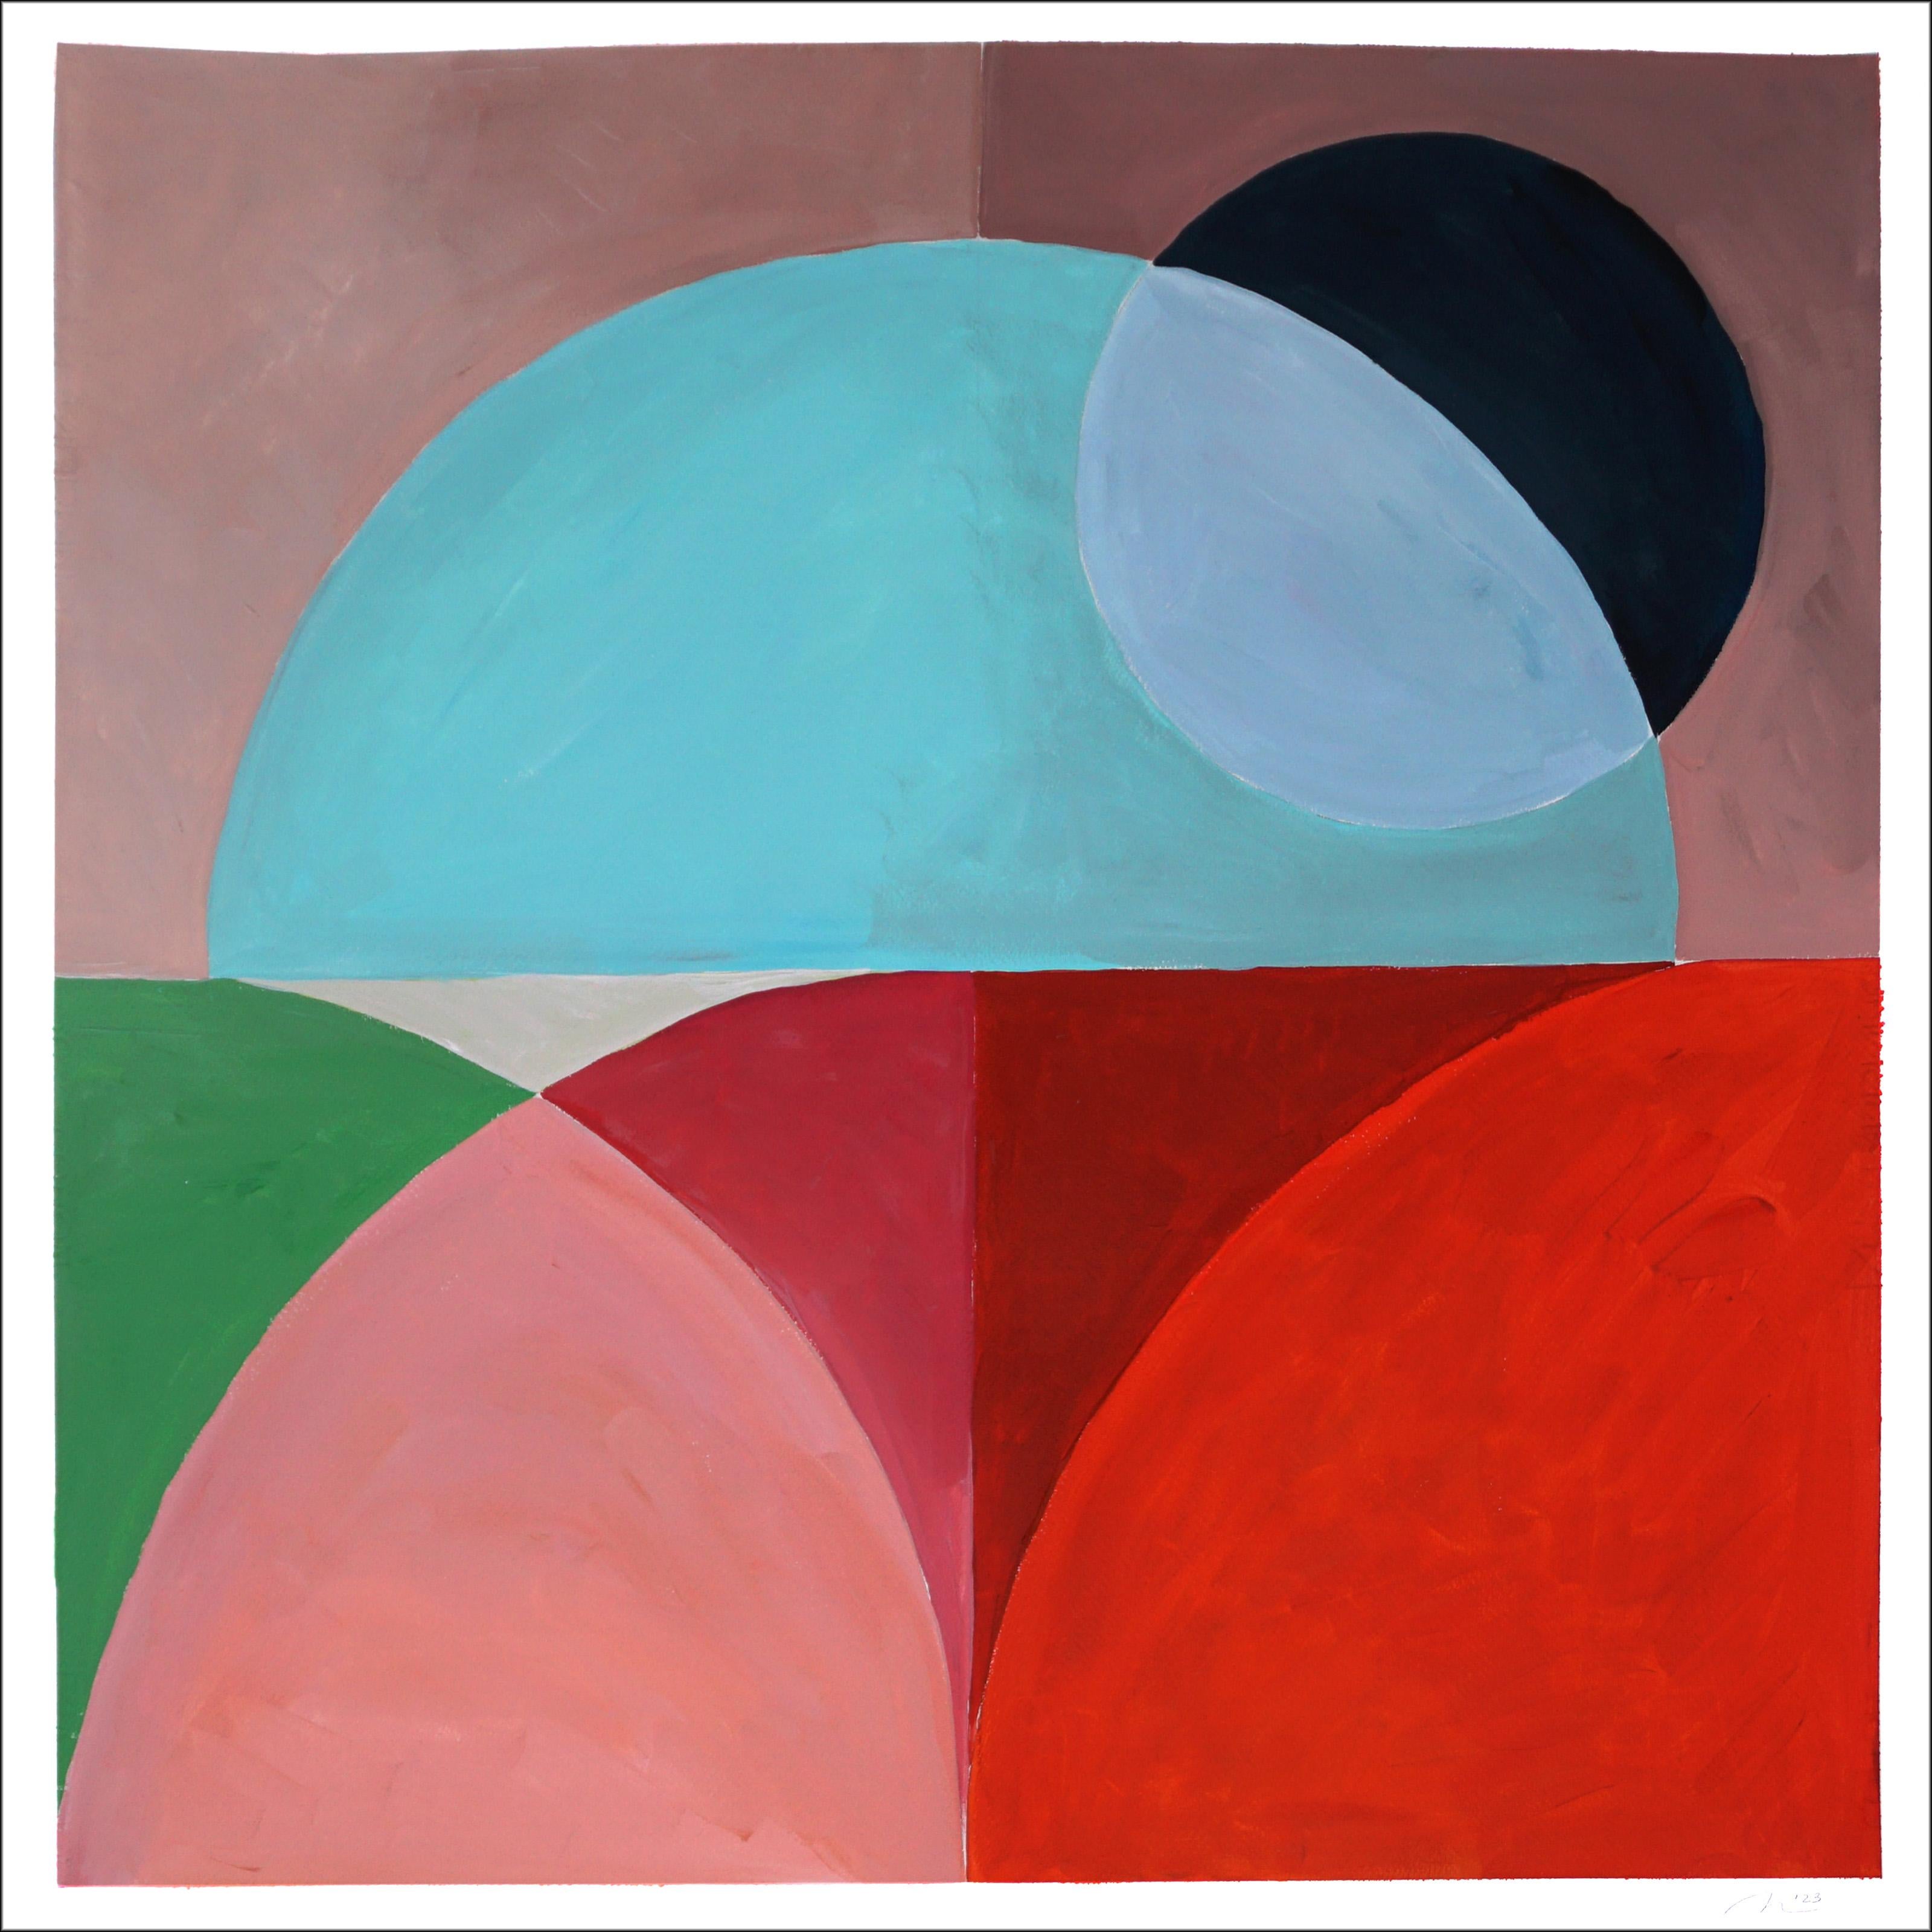 Natalia Roman Abstract Painting - Volcano Eclipse, Geometric Landscape in Red, Turquoise, Black Moon, Astronomy